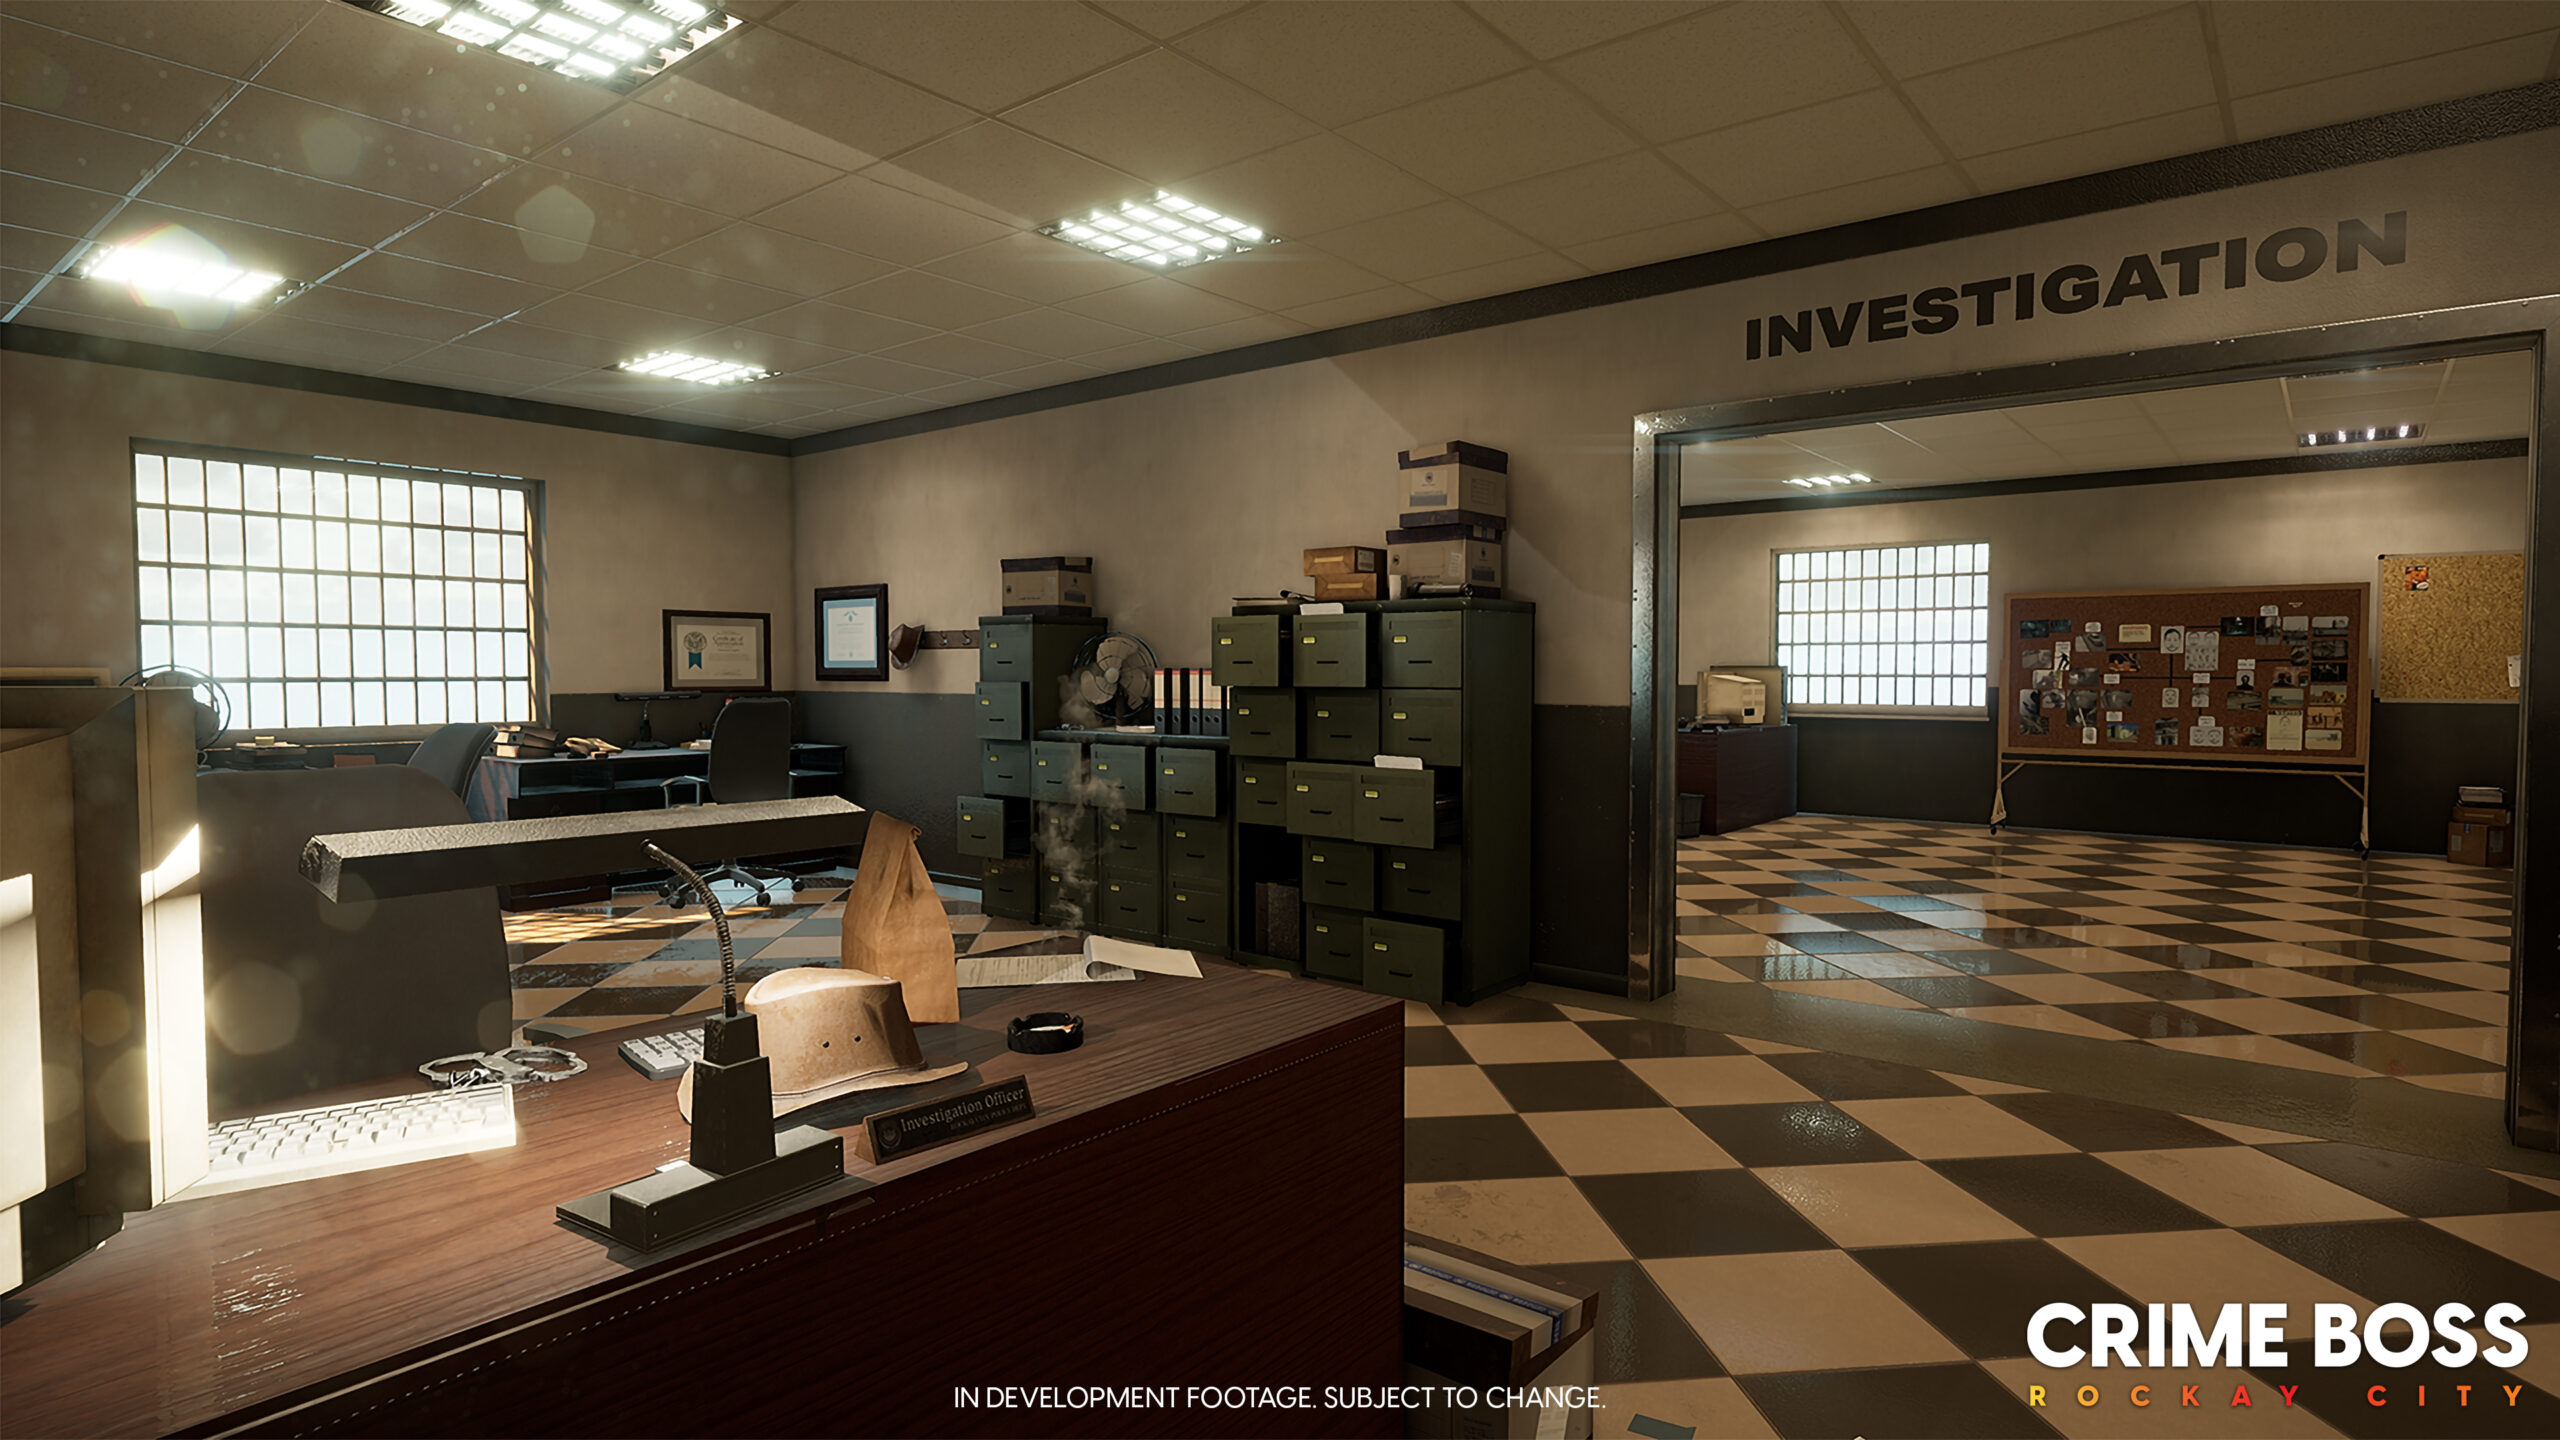 An in development image from the game, Crime Boss: Rockay City. The image shows the inside look of a police station With a cluttered desk, filing cabinets and a cork board